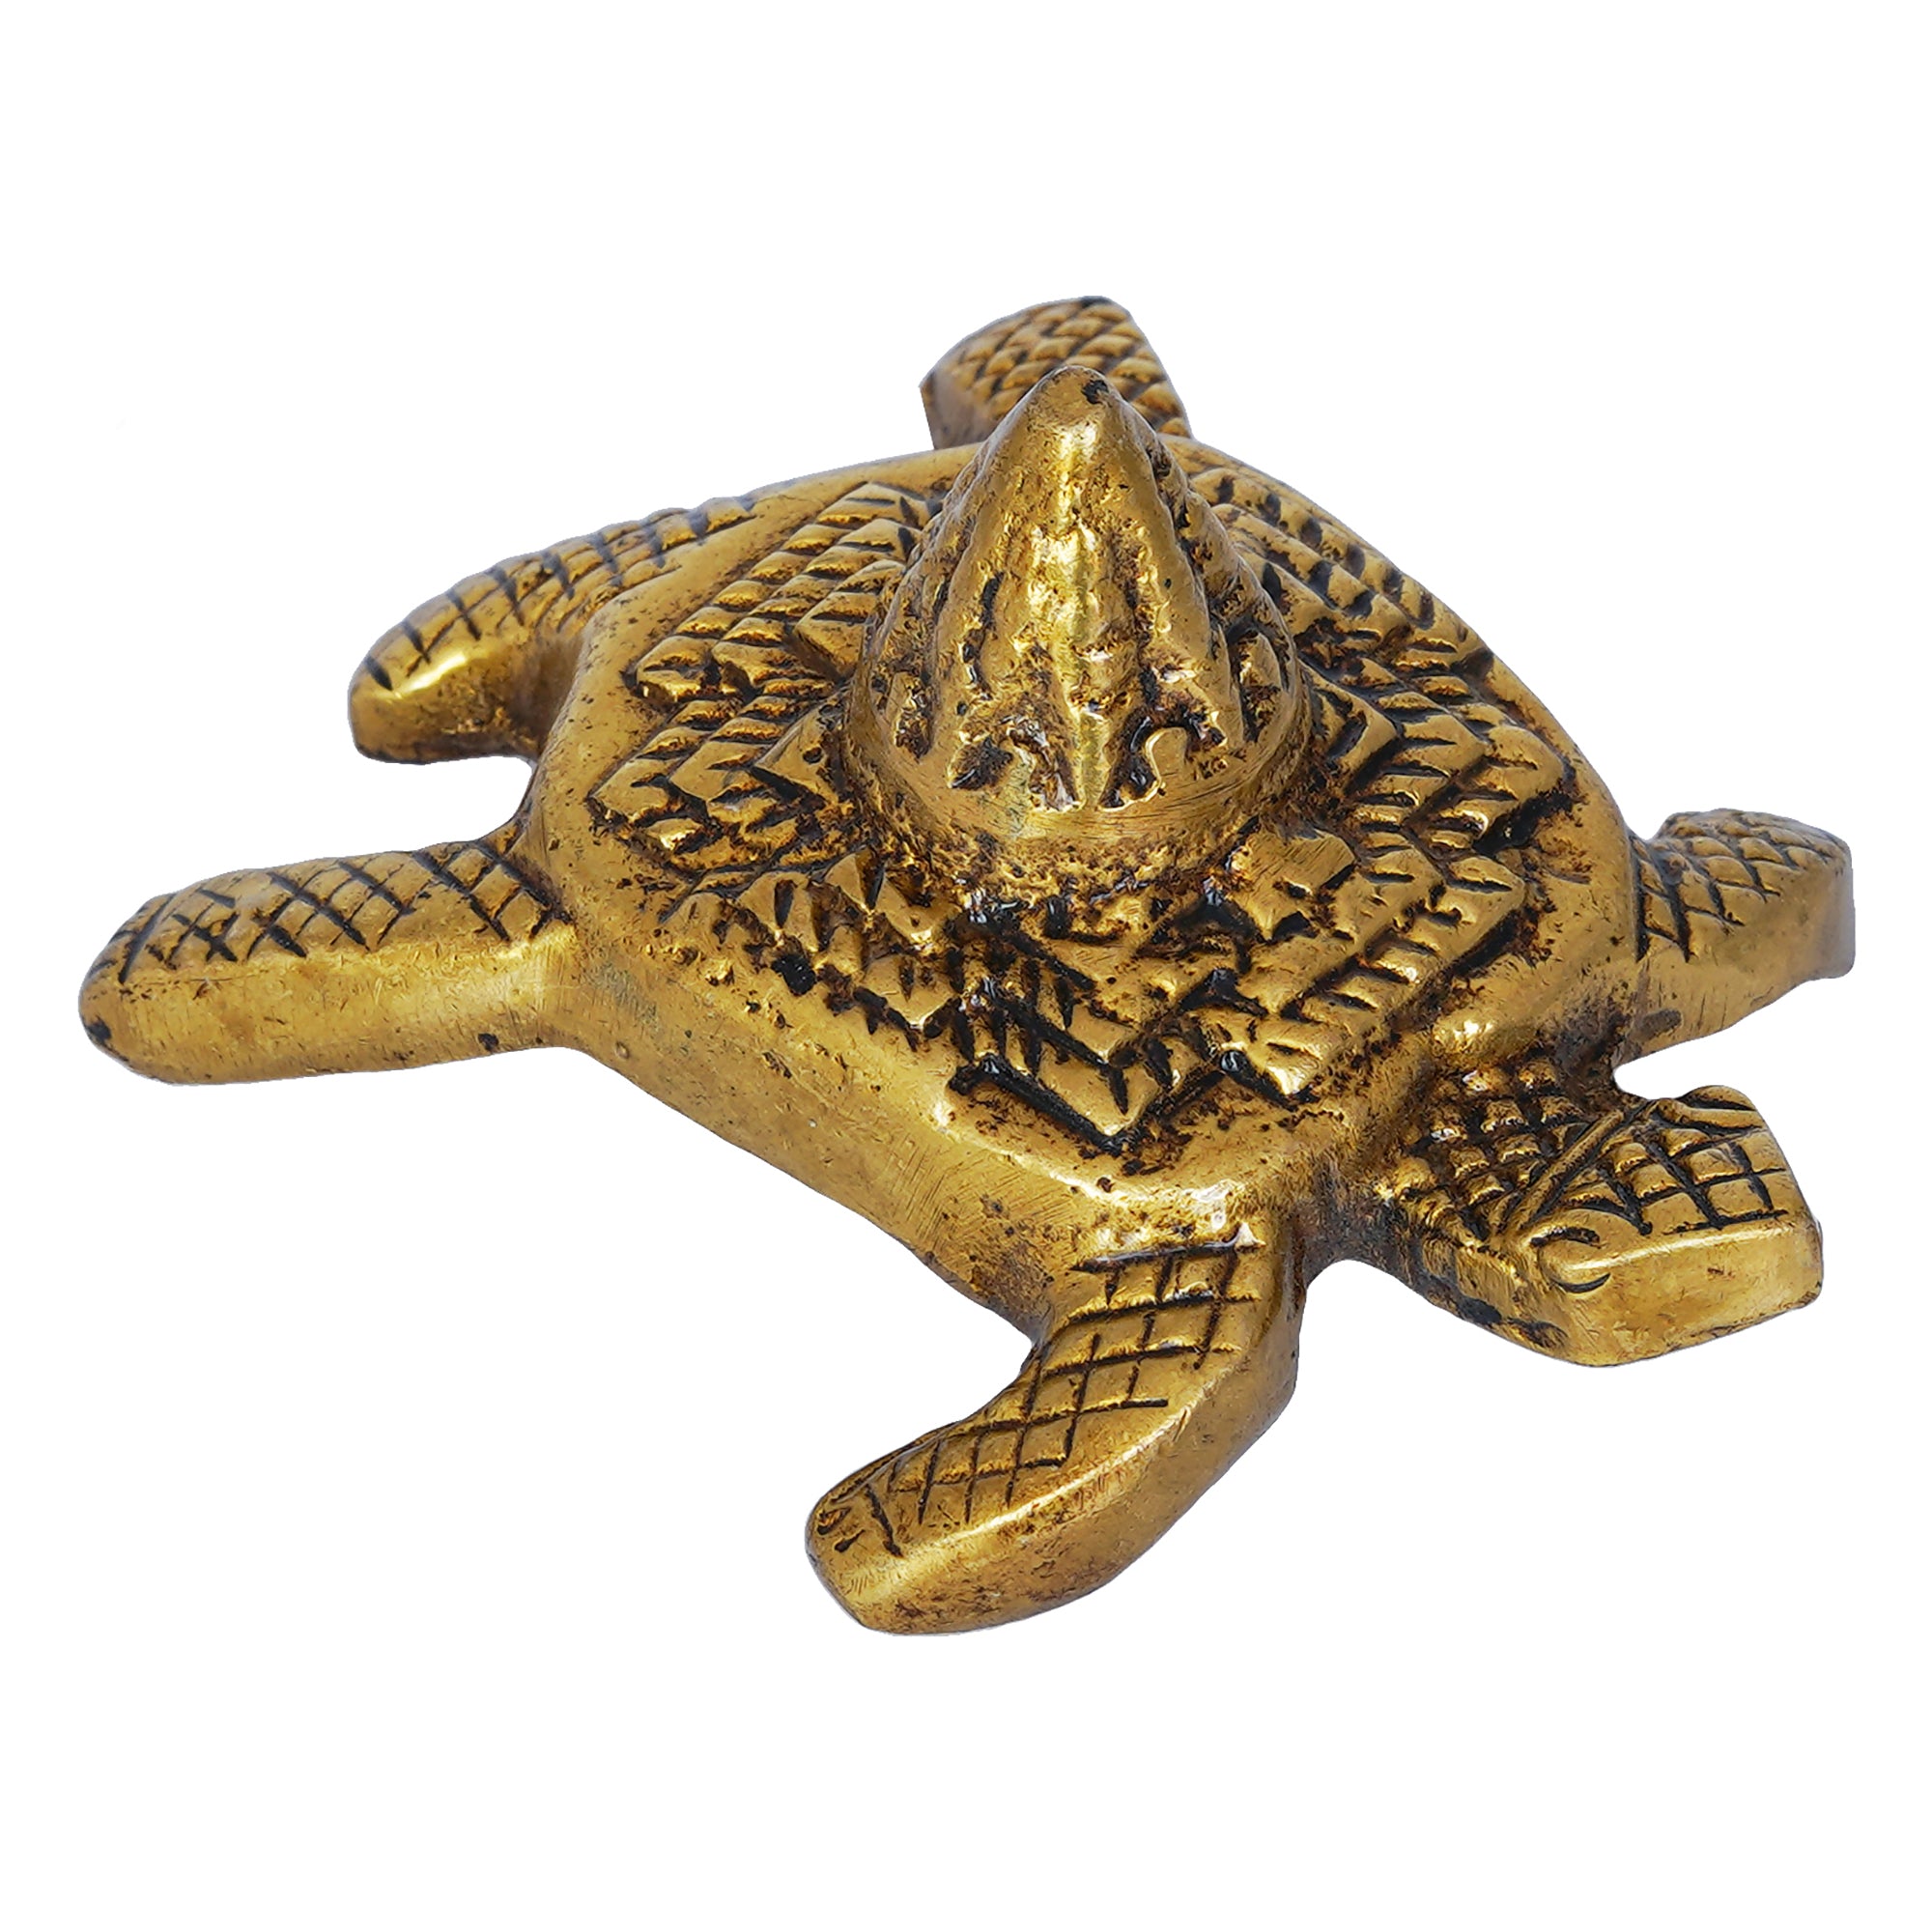 Golden Brass Meru Shree Yantra on Tortoise Statue Showpiece for Home, Office, and Temple - Bring Good Luck - Gift for Festive Occasions 2